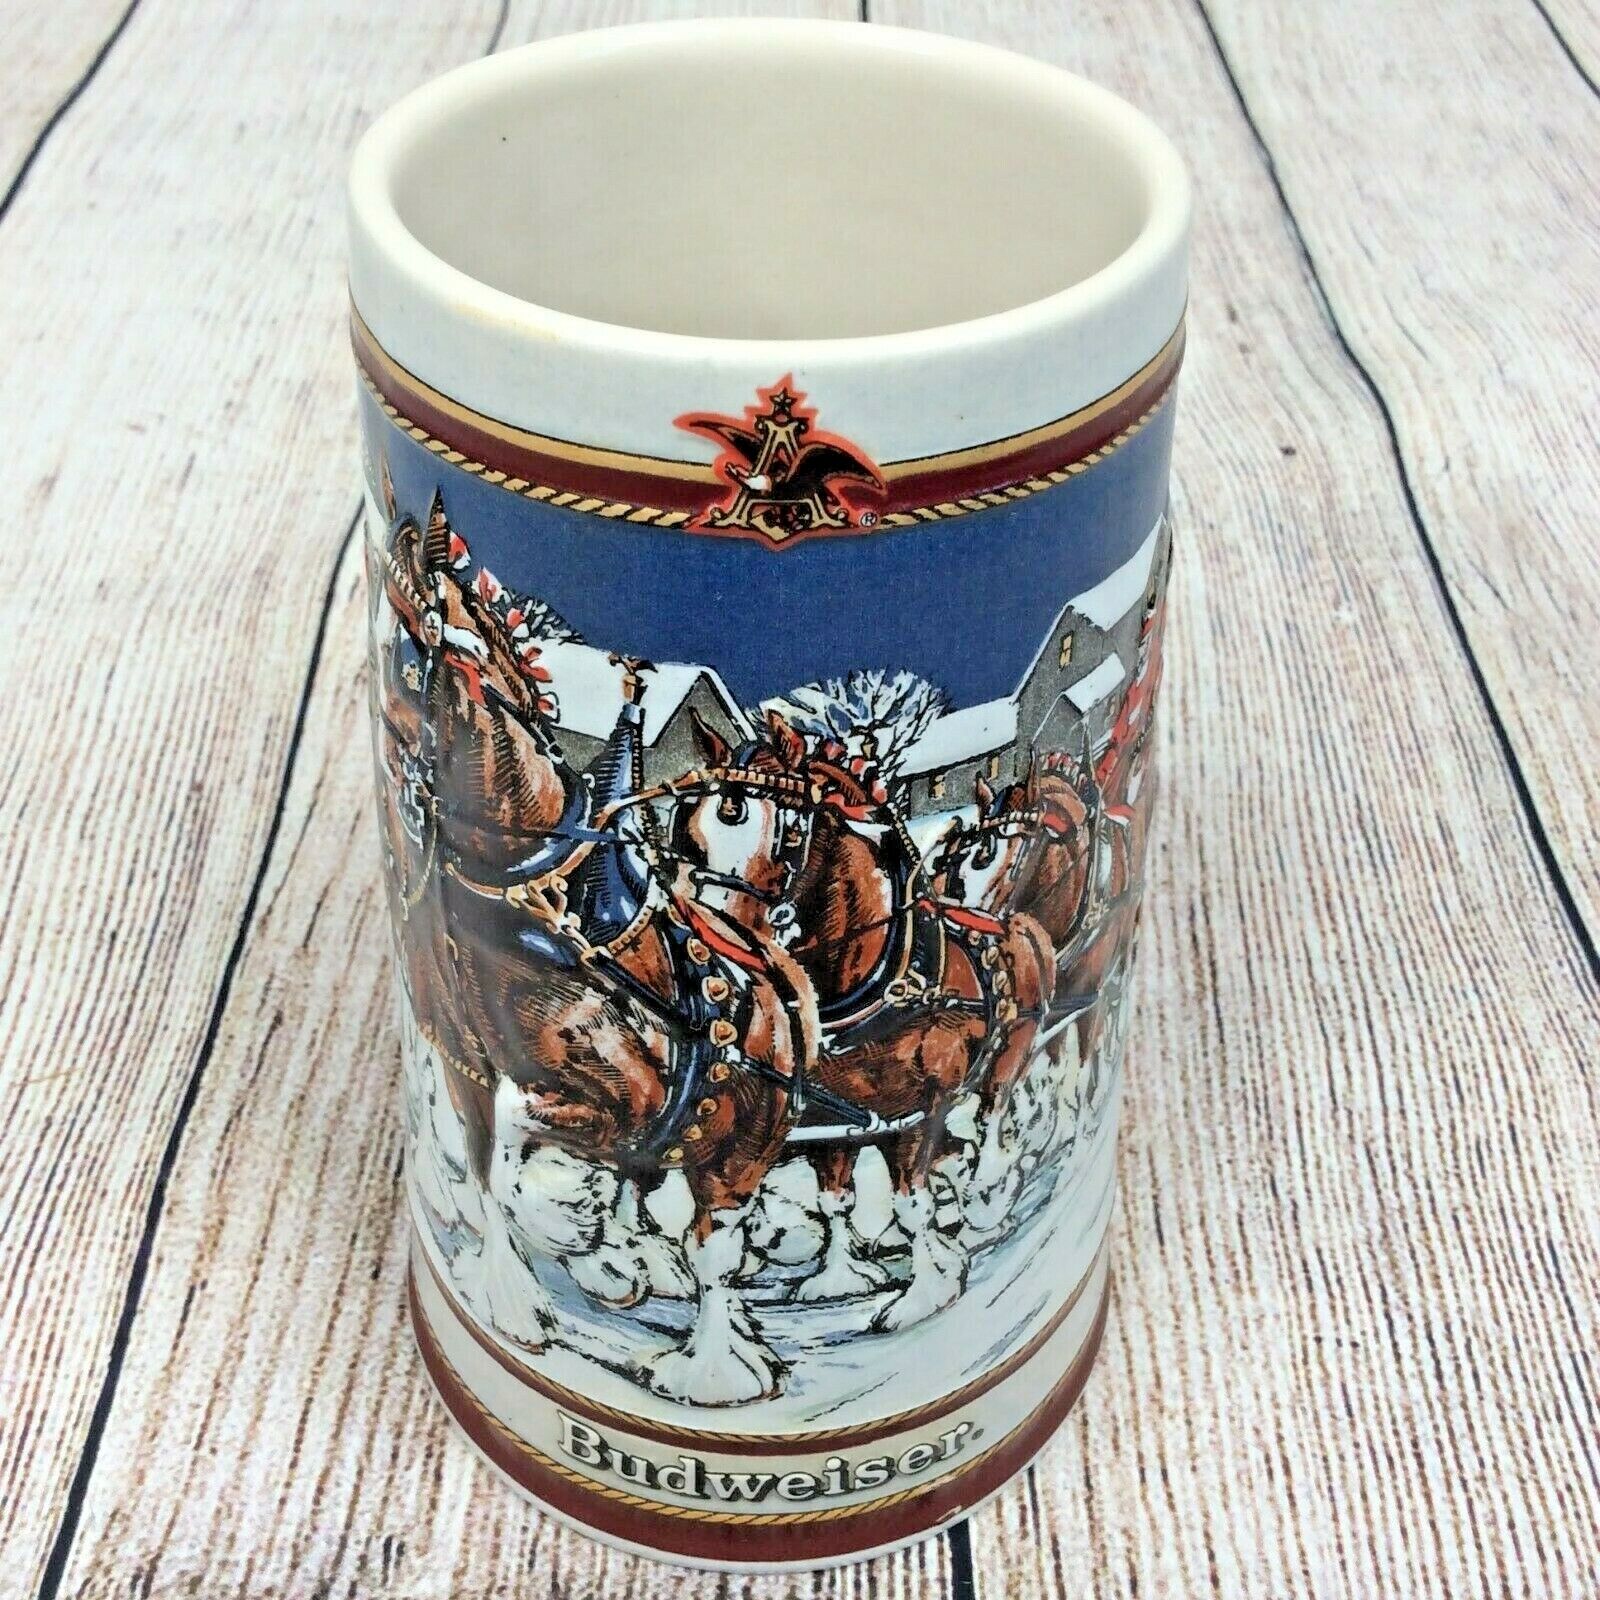 1989 Anheuser Busch Budweiser Clydesdale Holiday Stein Collectors Series